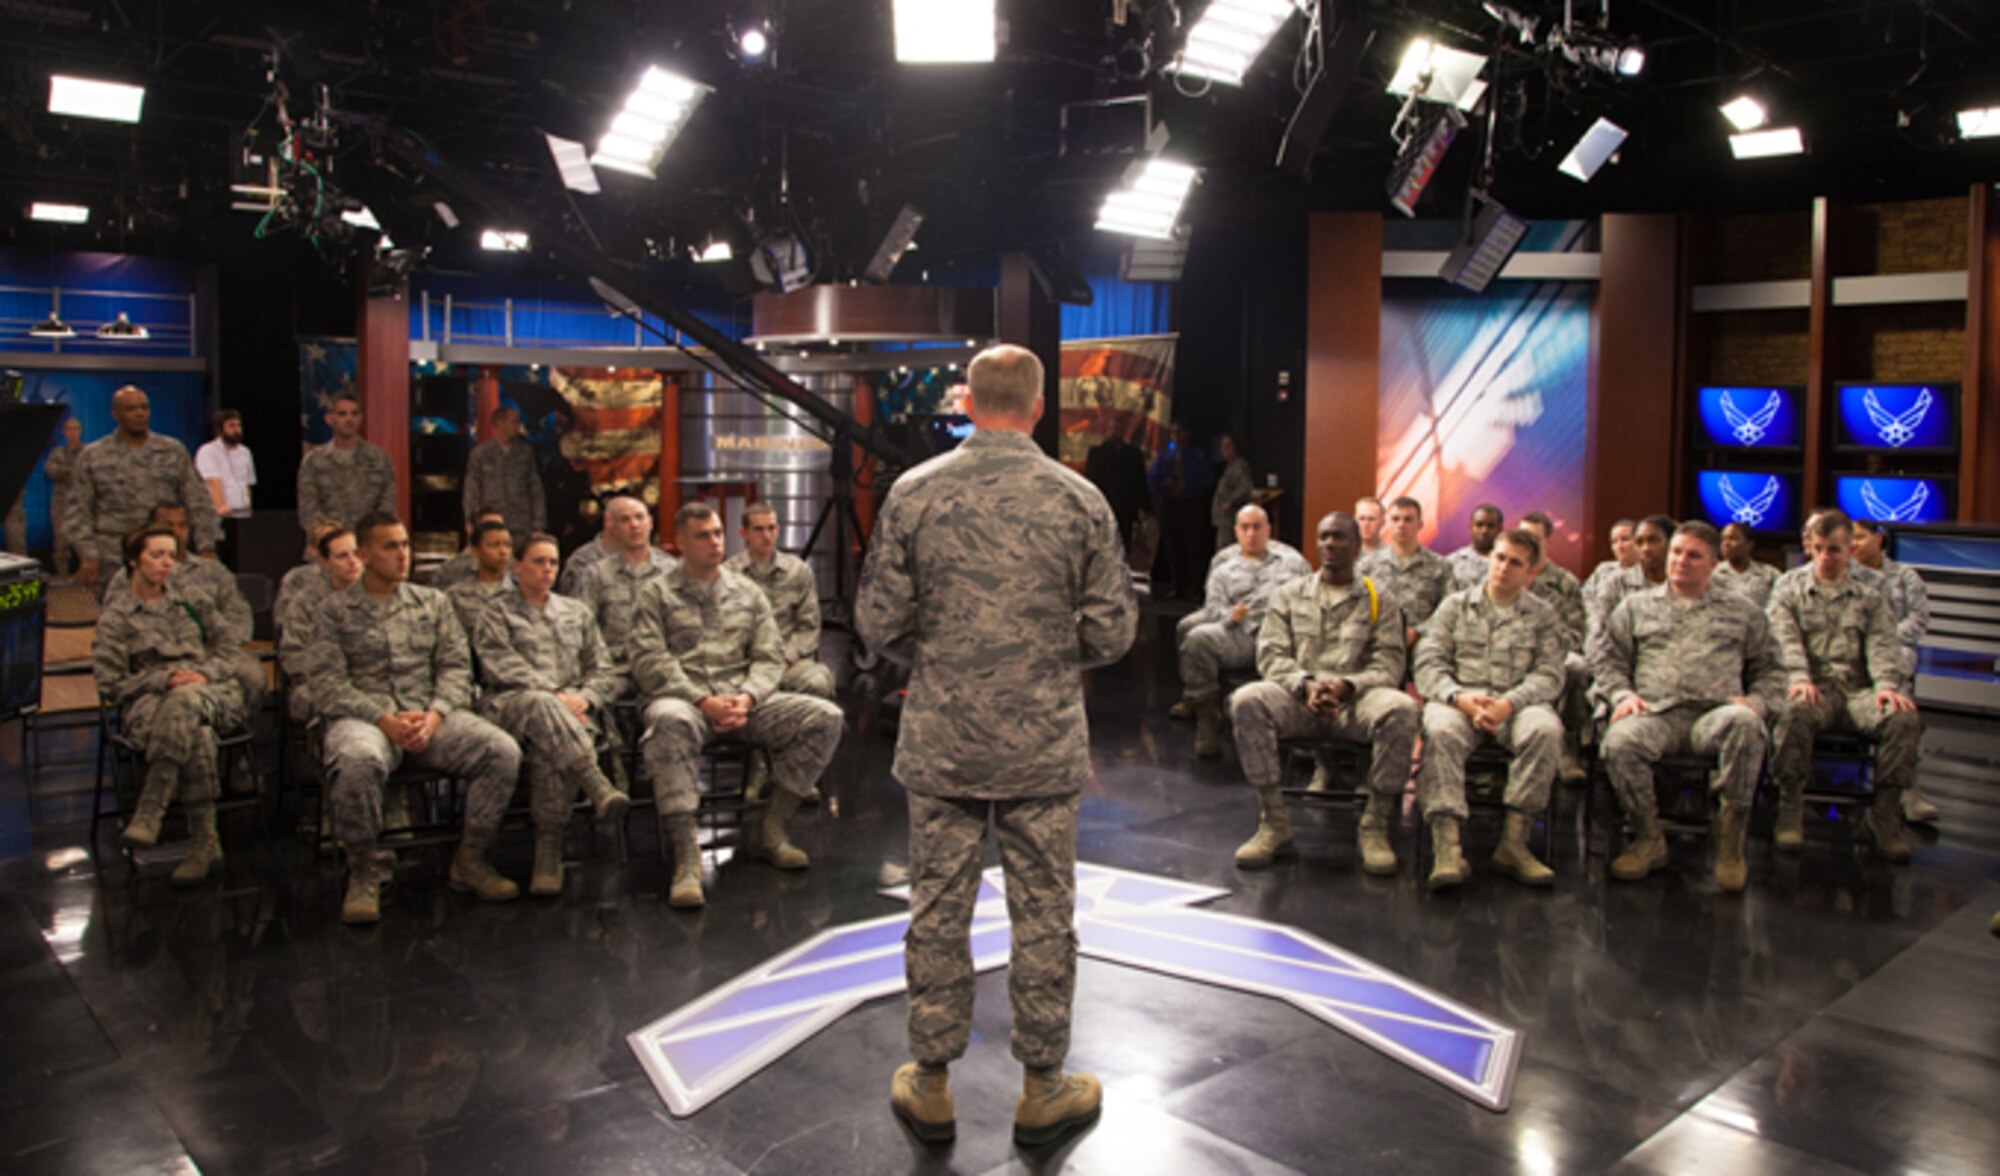 Chief Master Sergeant of the Air Force James A. Cody speaks to Airman during a worldwide CHIEFchat Nov. 12, 2013, at the Defense Media Activity at Fort Meade, Md. During the meeting Airmen submitted questions to the chief through social media, video submissions and in the studio.